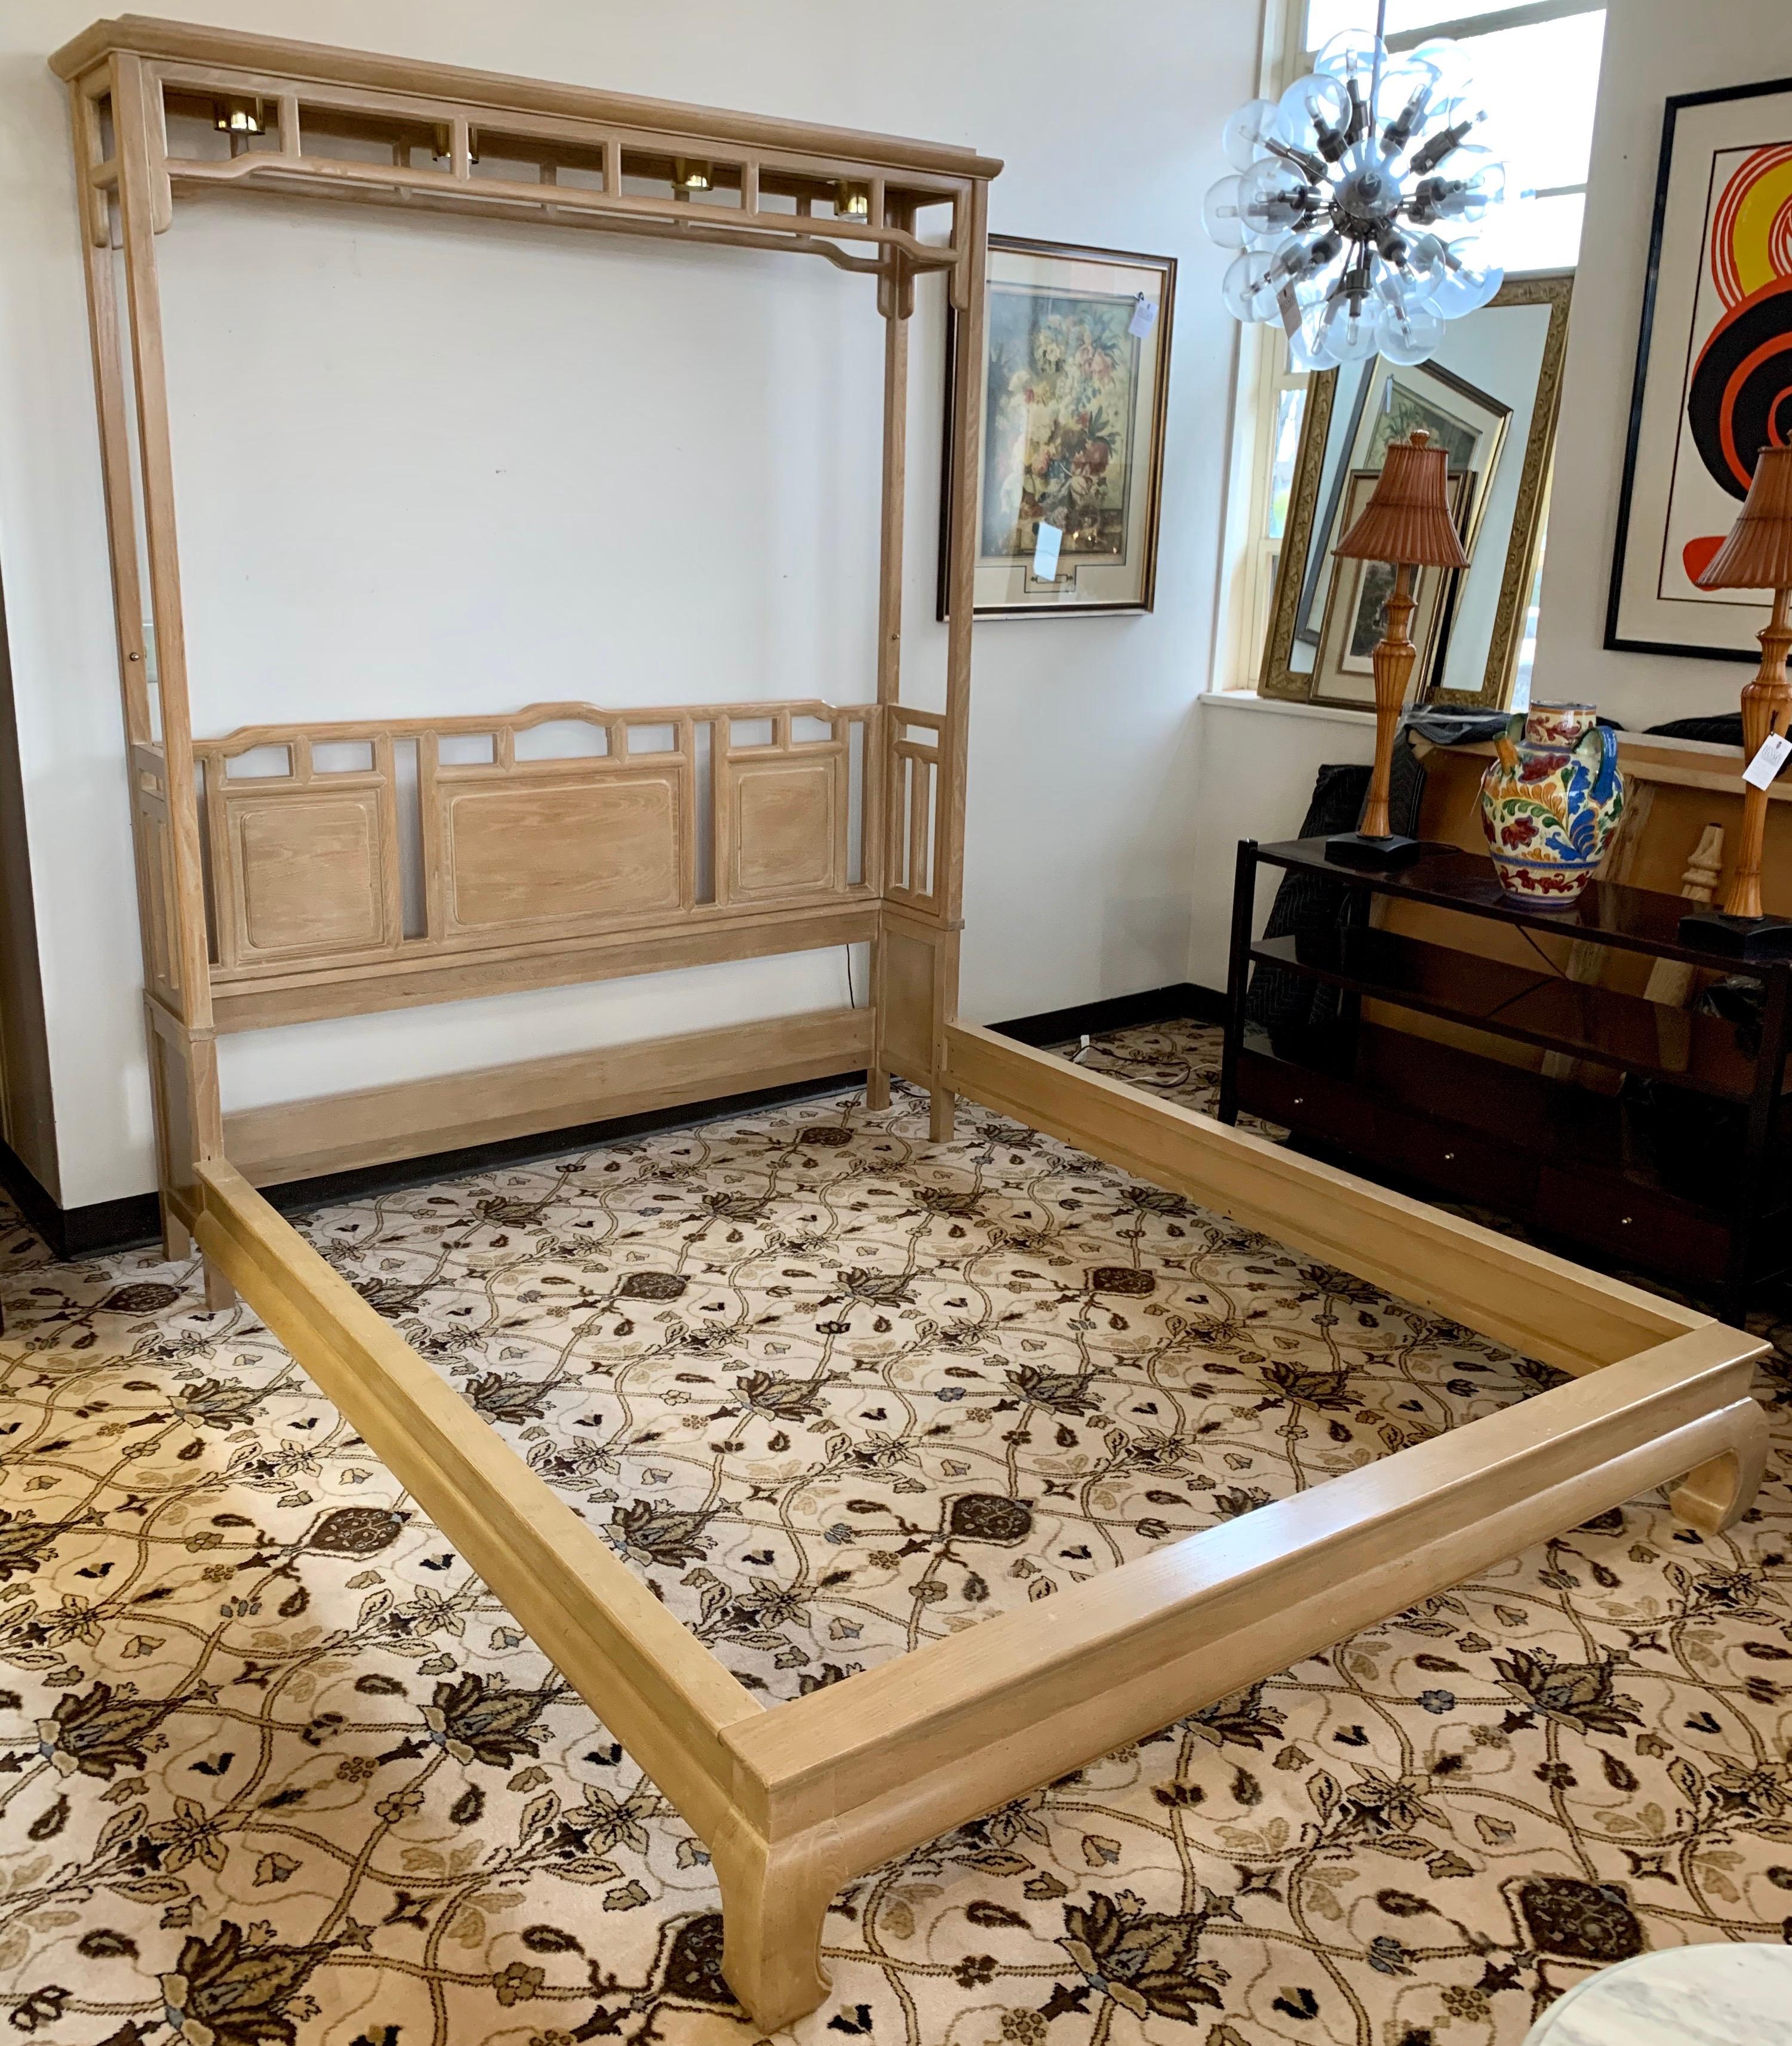 Coveted and rare Ray Sabota designed Asian inspired pagoda queen size bed manufactured by Century
Furniture, North Carolina, USA in the 1970s. This queen size set features headboard, footboard, rails and attached four light fixtures that are